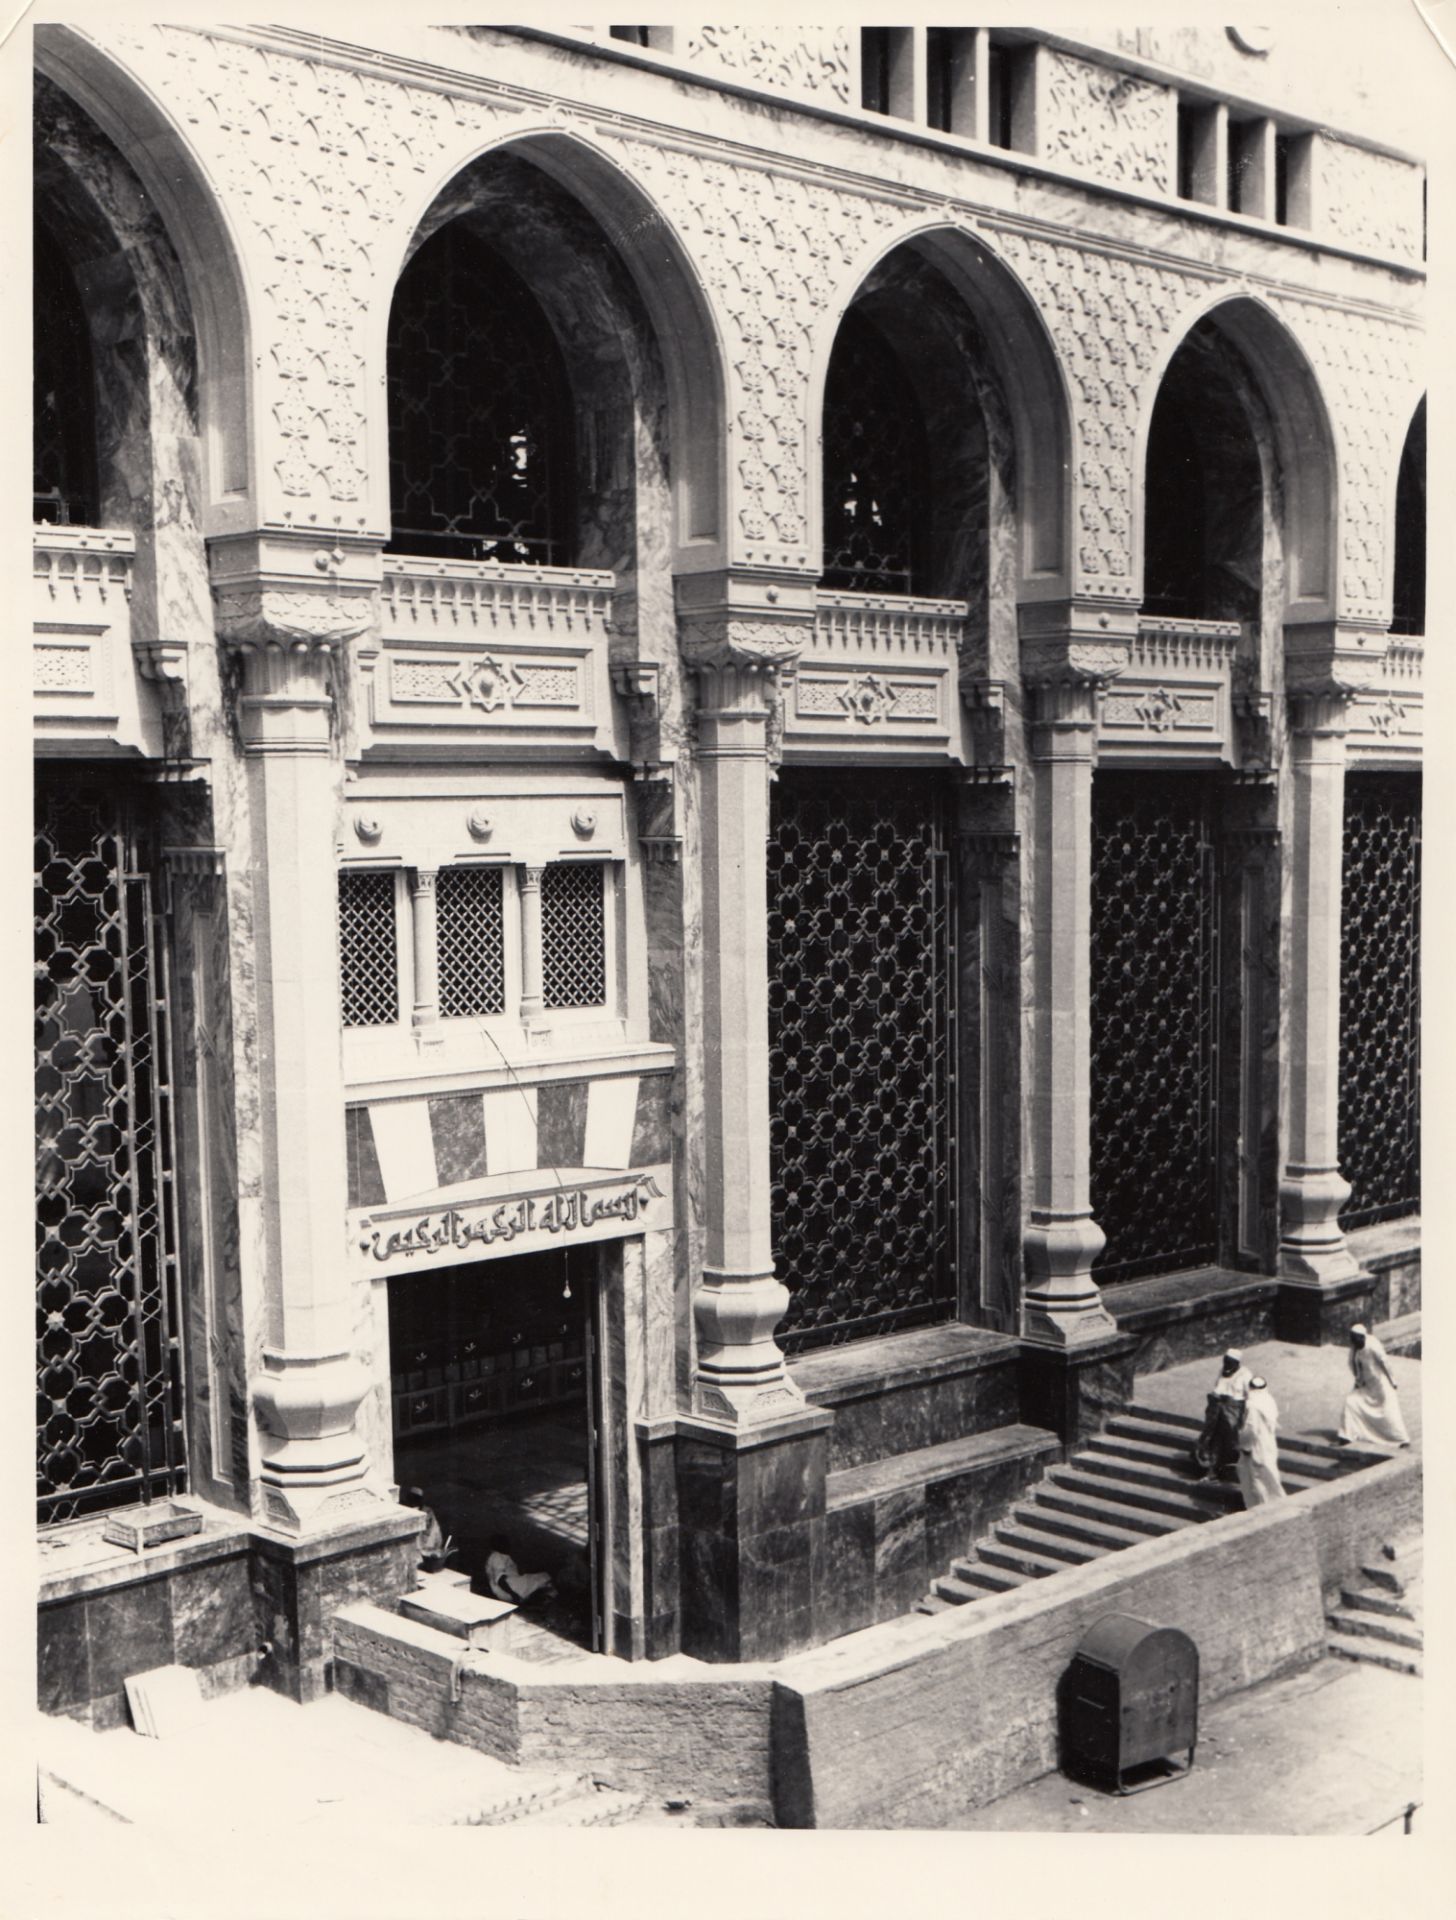 FOURTEEN RARE PHOTOGRAPHS OF THE FIRST EXPANSION OF THE MASJID AL-HARAM DURING KING SAUD BIN ABDULAZ - Image 14 of 16